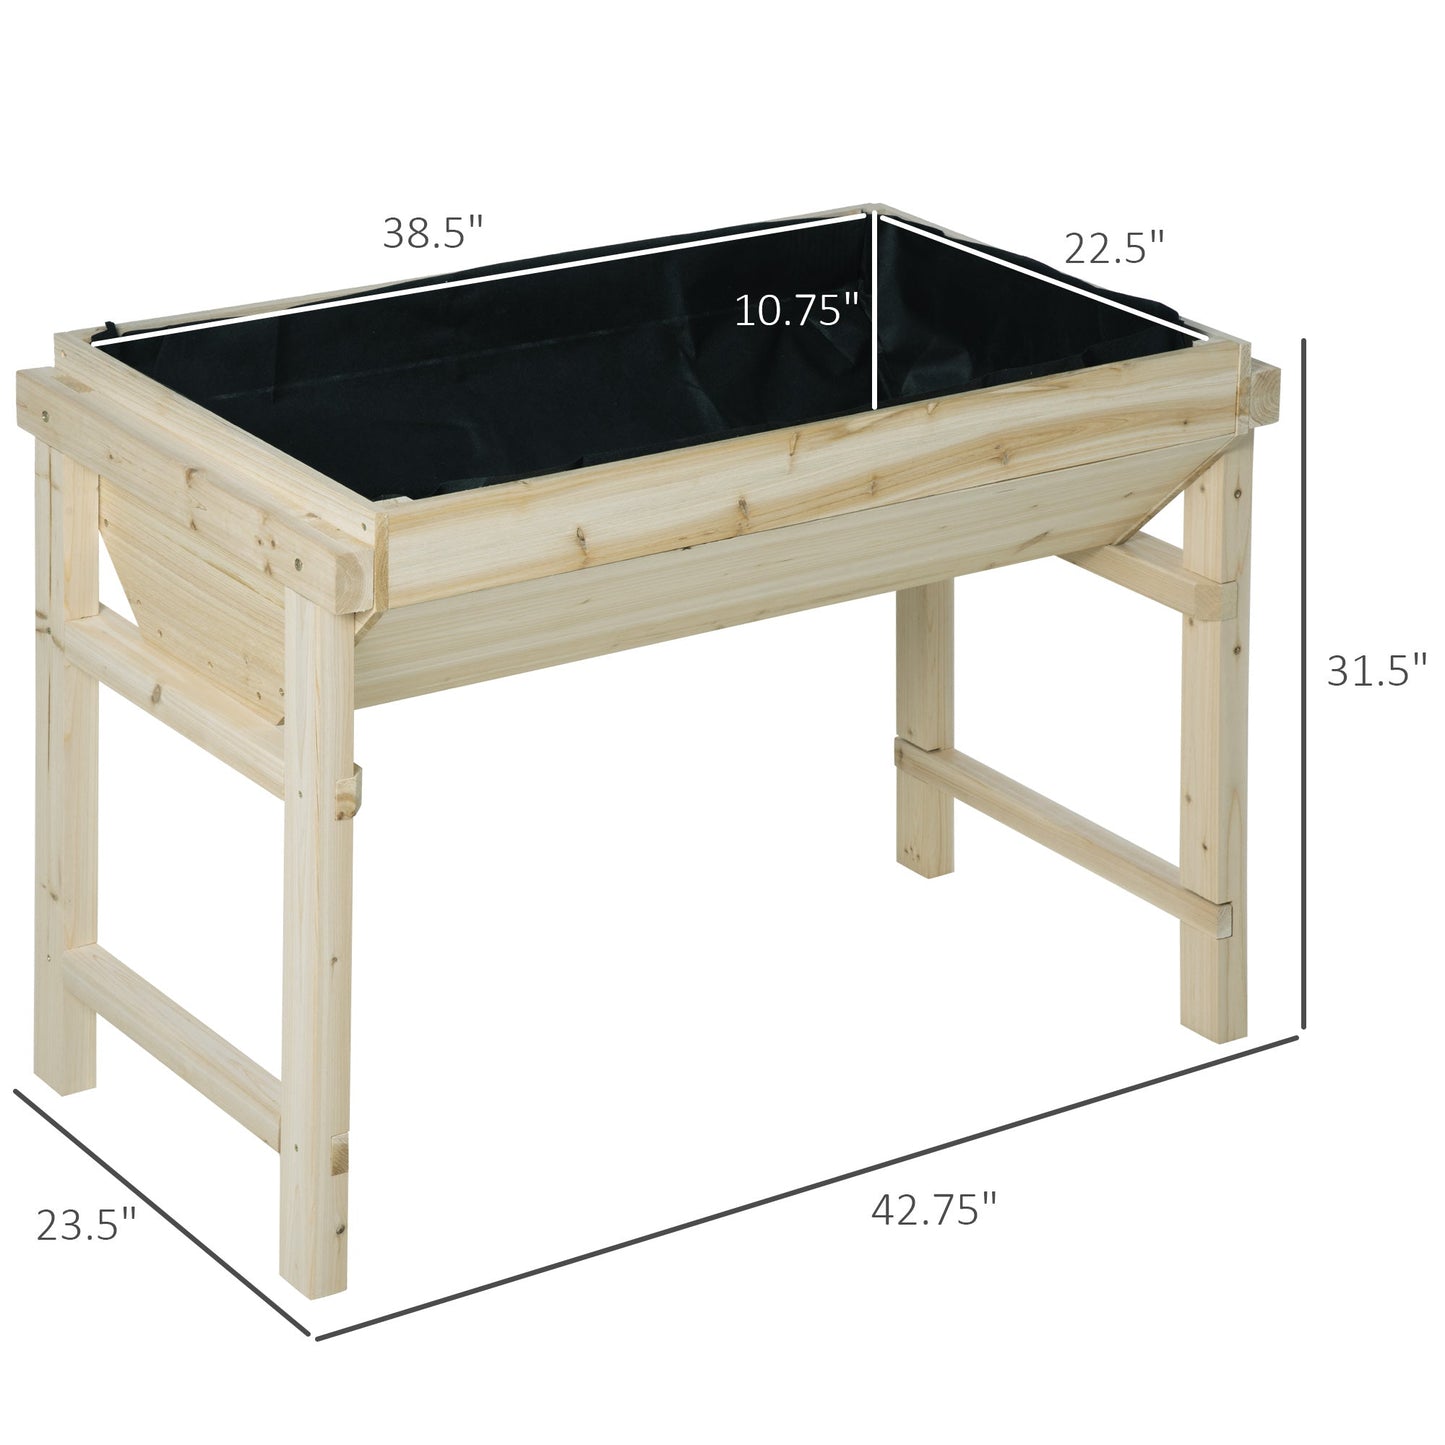 43" x 24" Raised Garden Bed, Wooden Elevated Planter Box with Non-Woven Fabric for Vegetable, Flower, Herb in Patio, Backyard and Balcony, Natural - Gallery Canada